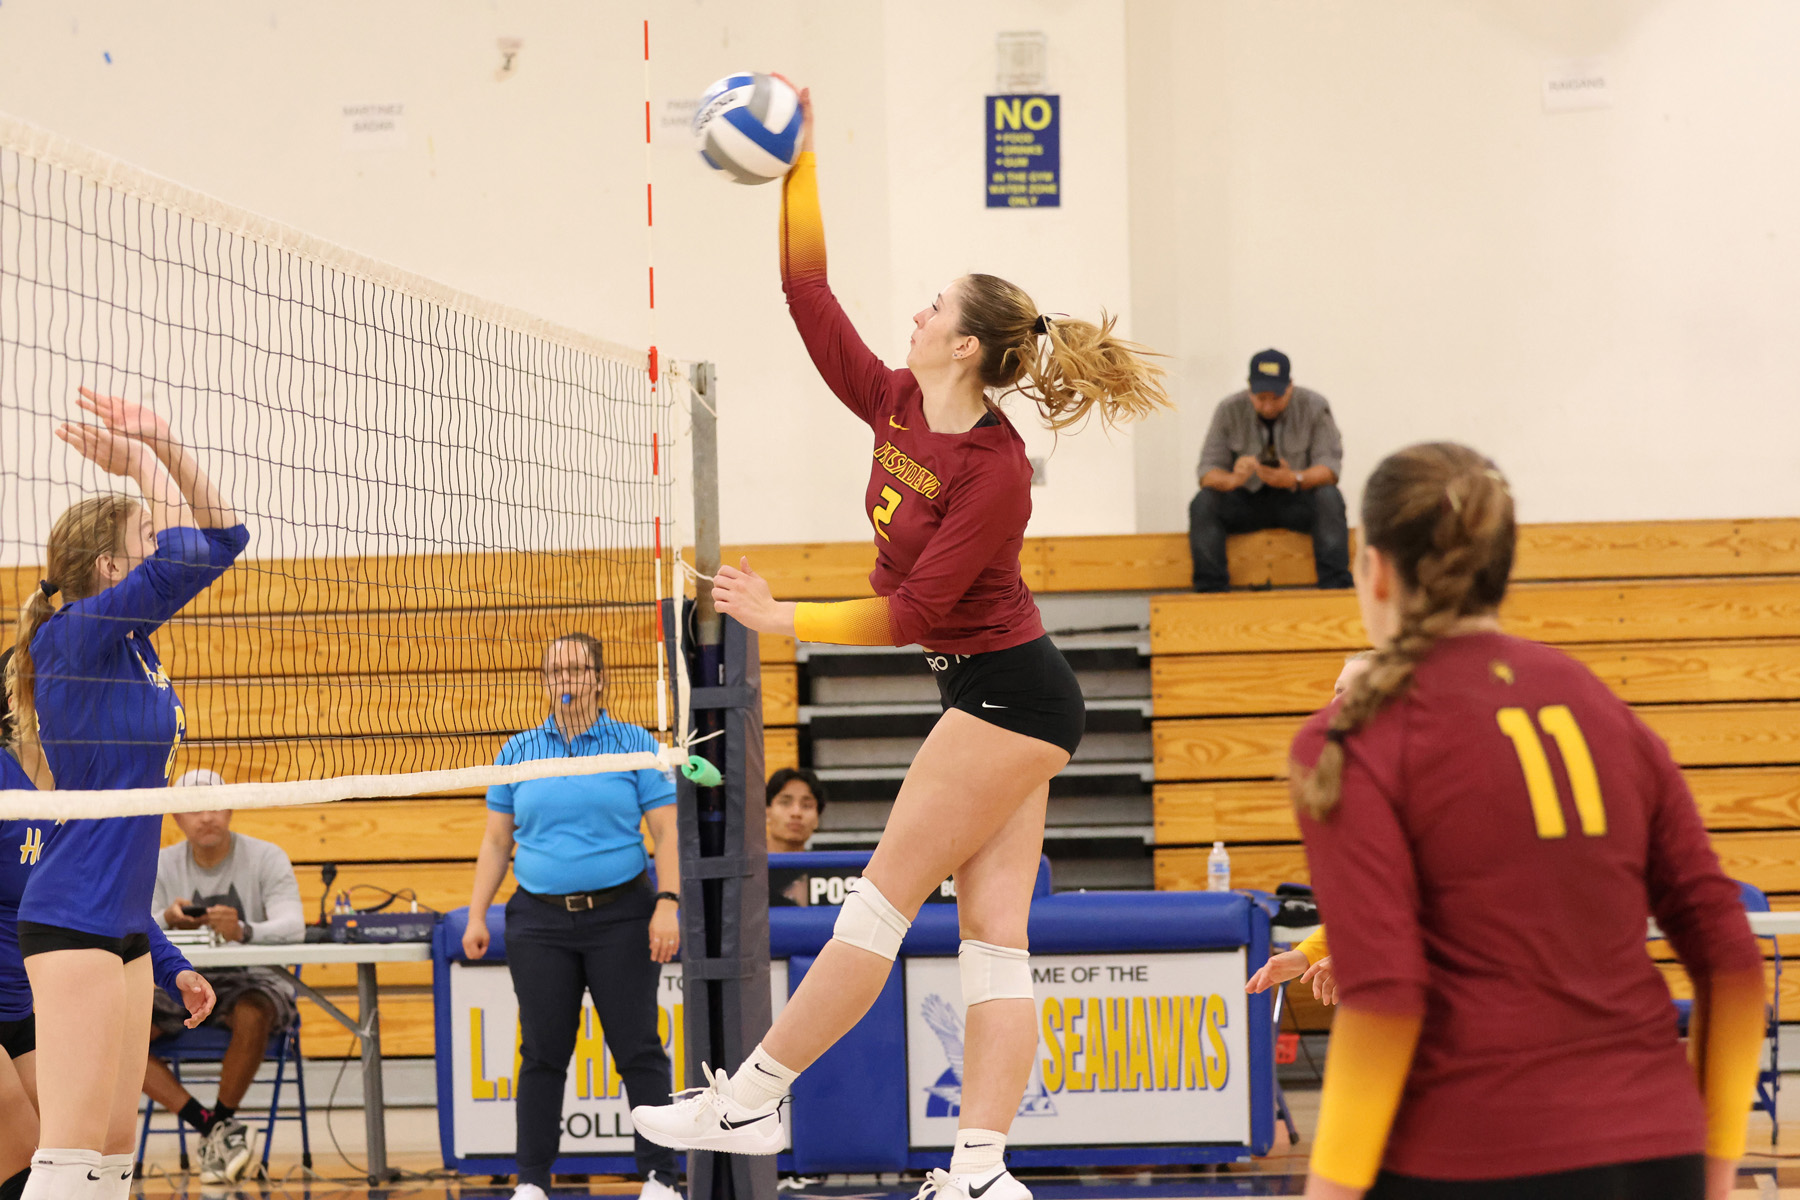 Katie Carius drives home a kill during PCC's conference-openingi win on Wednesday at LA Harbor (photo by Richard Quinton).